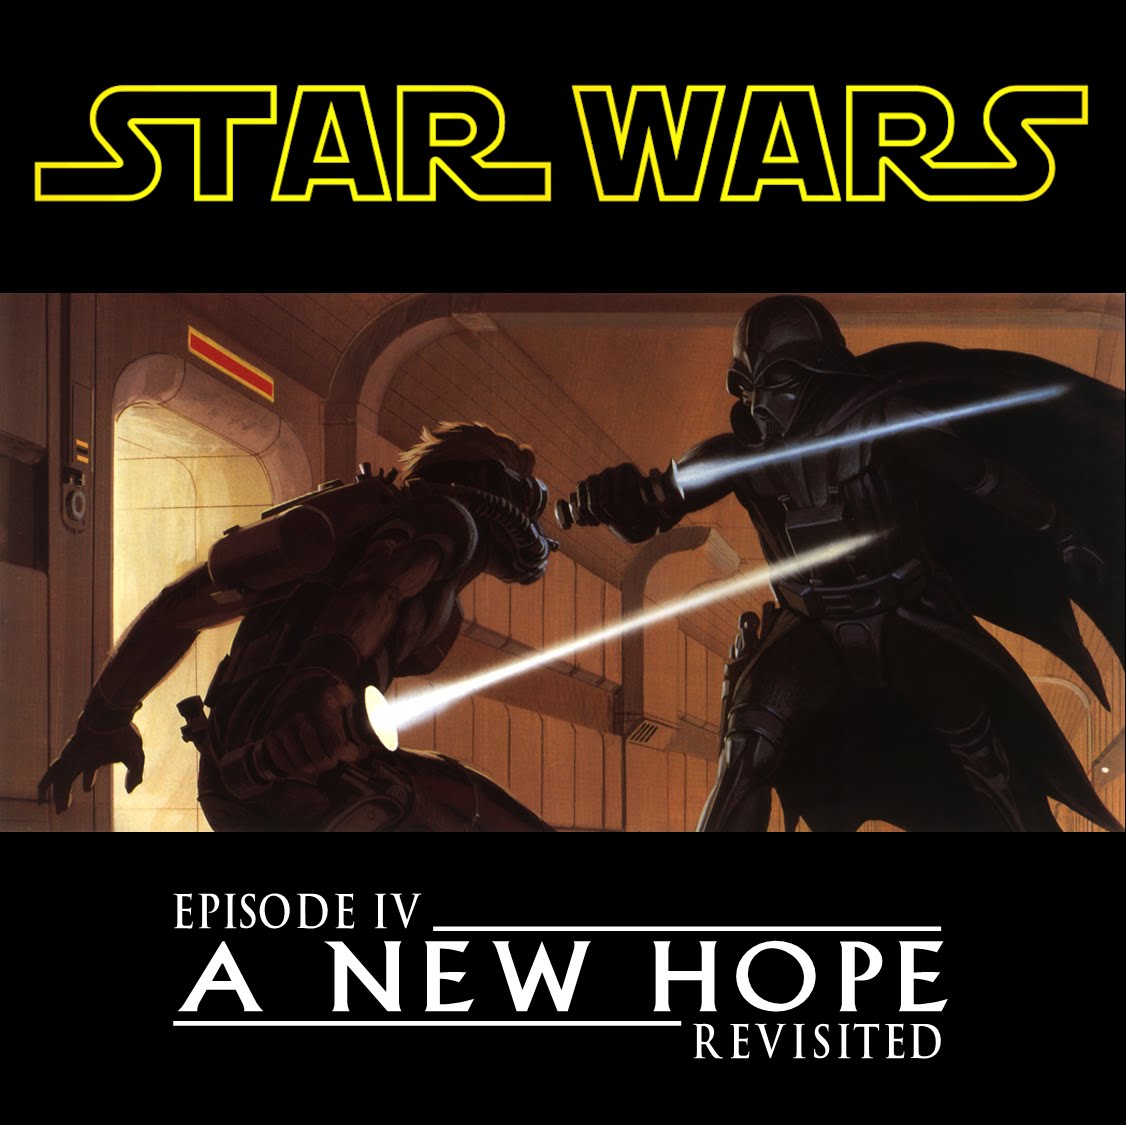 Star wars a new hope revisited